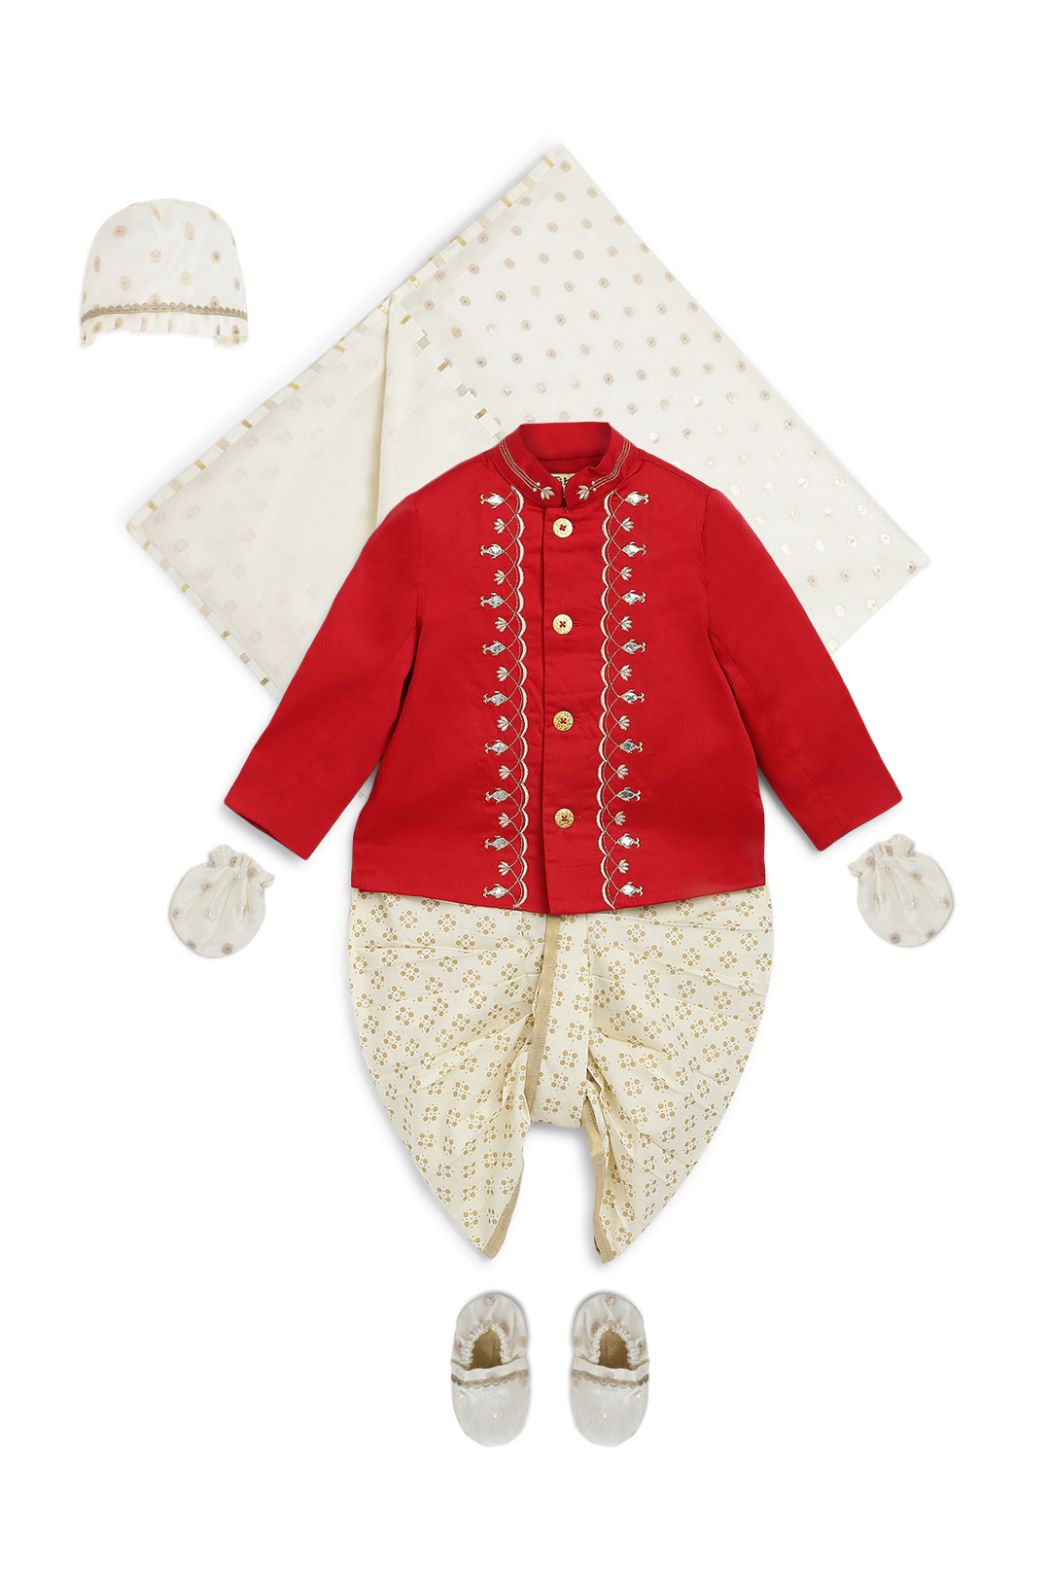 Baby Boy Fish Embroidery Jamna Set - Red